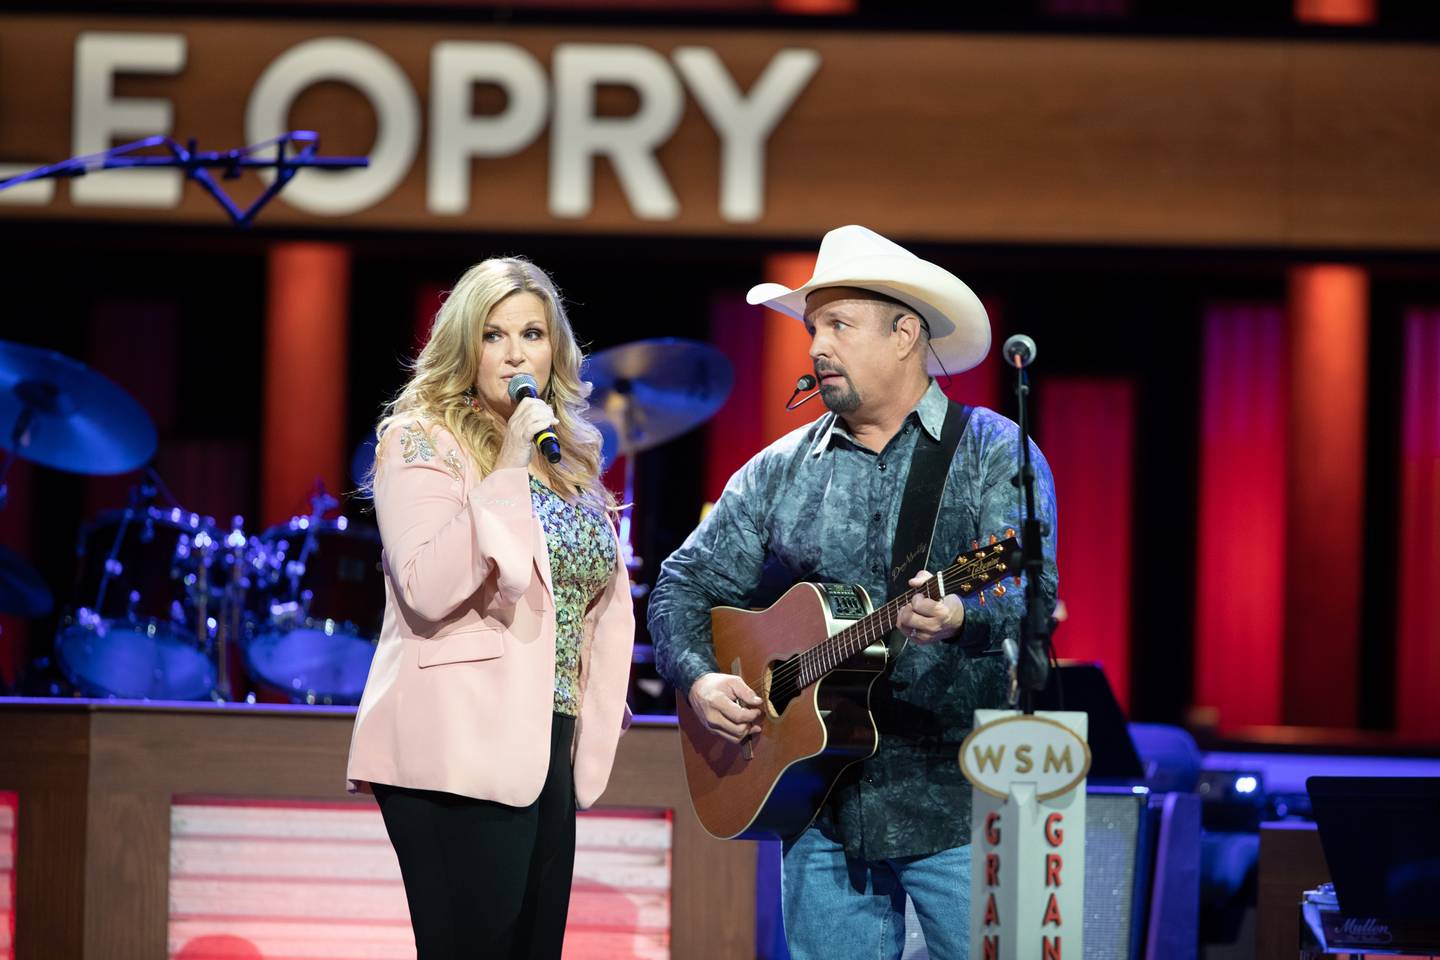 Garth Brooks And Trisha Yearwood The Story Behind “in Another’s Eyes